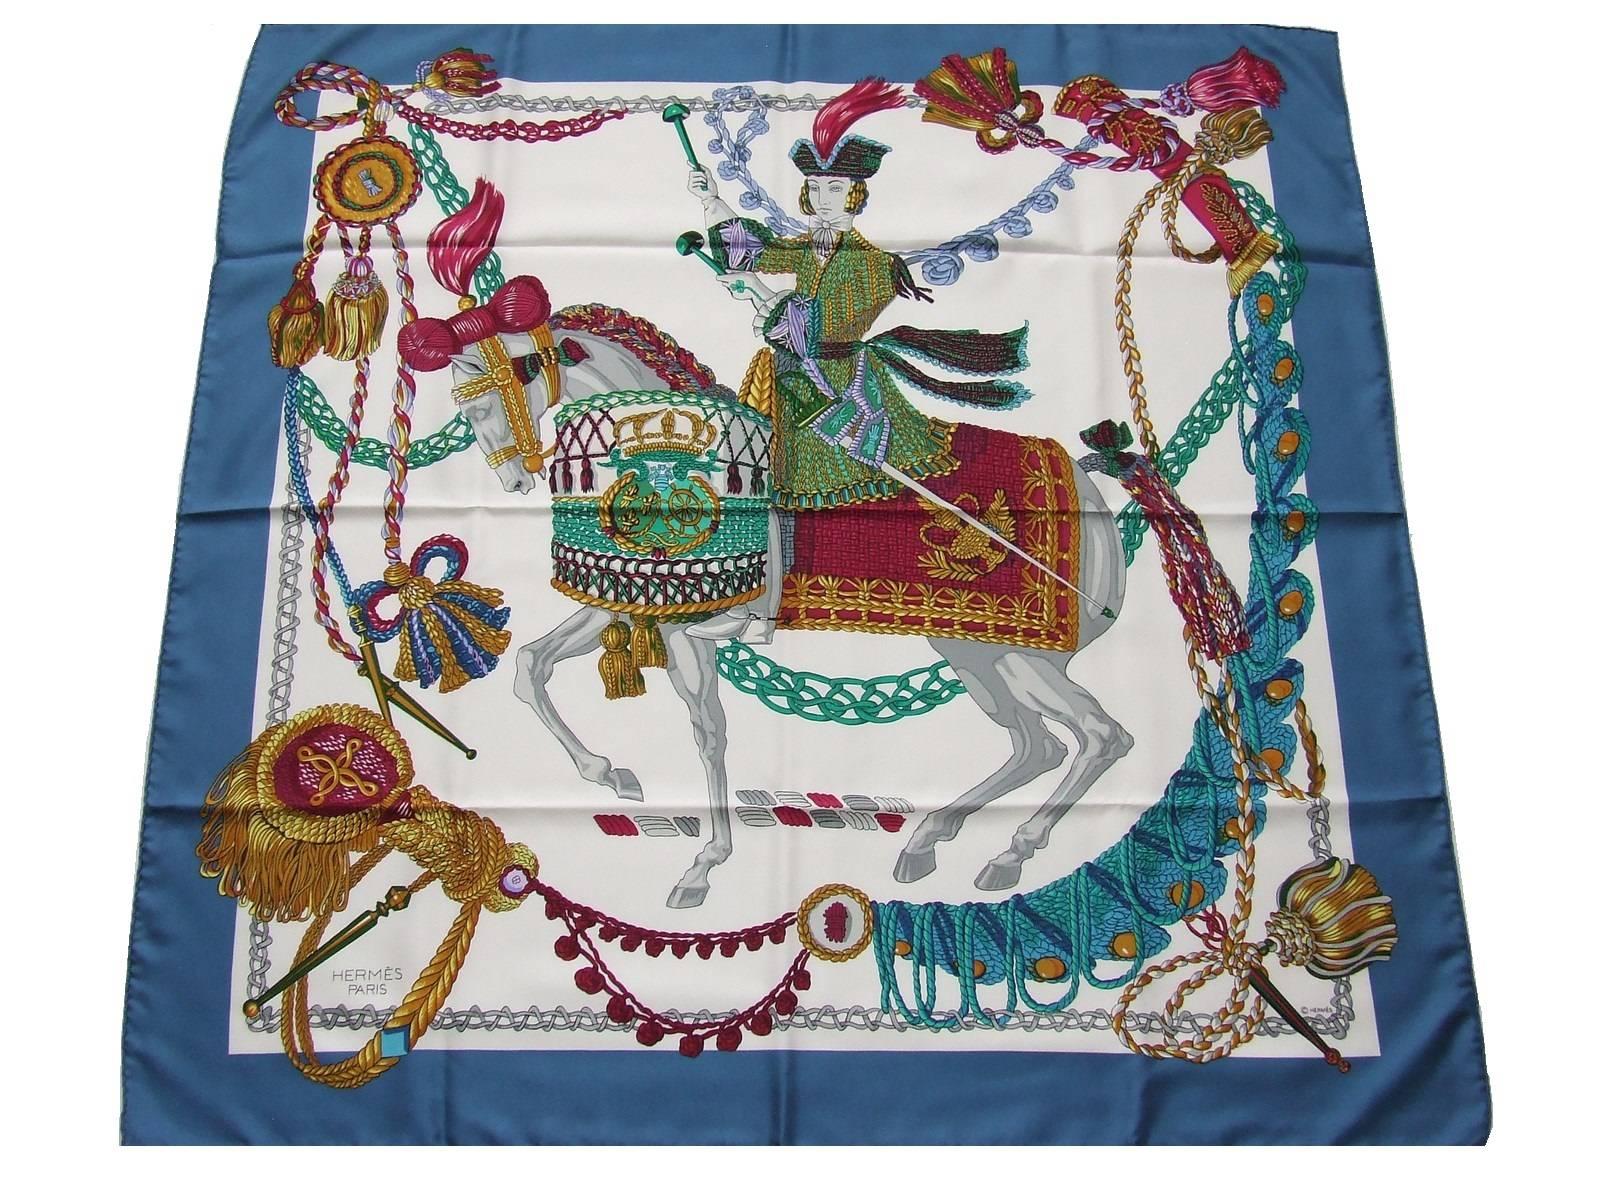 Stunning Authentic Hermes Scarf

Pattern: Le Timbalier

Made in France

Designed by Fracoise Heron in 1961

Made of 100% Silk

Colorways: Blue border, White Background, Multicolour Drawings

The colors are vibrant, beautiful . This is a